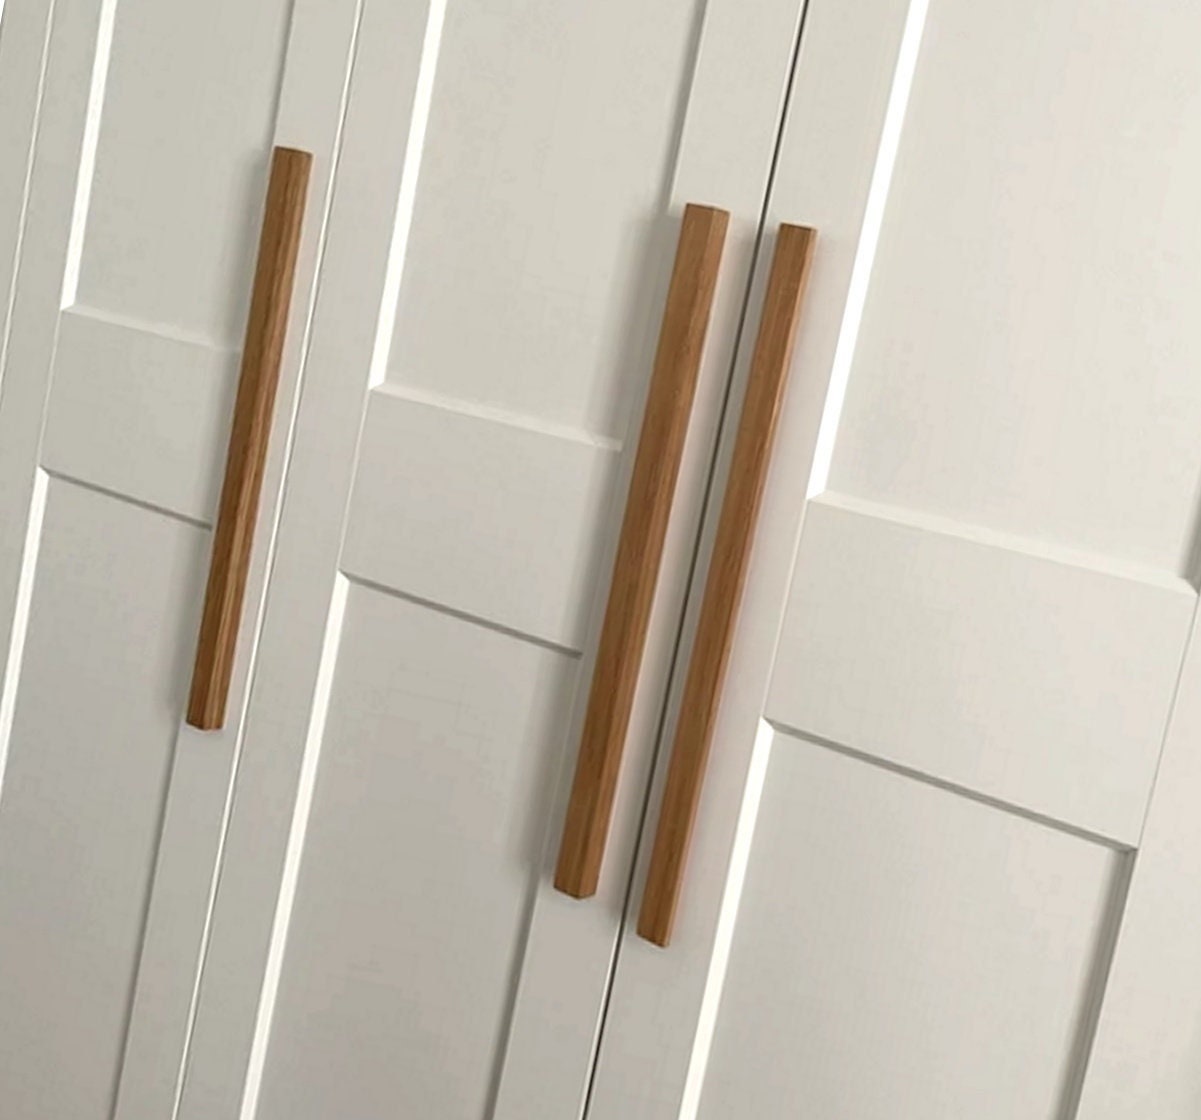 4x Natural Wood D-shaped Handles Pine and Oak Wood lacquered and  Unlacquered Finish 100mm 4'' Inch Pre Drilled 